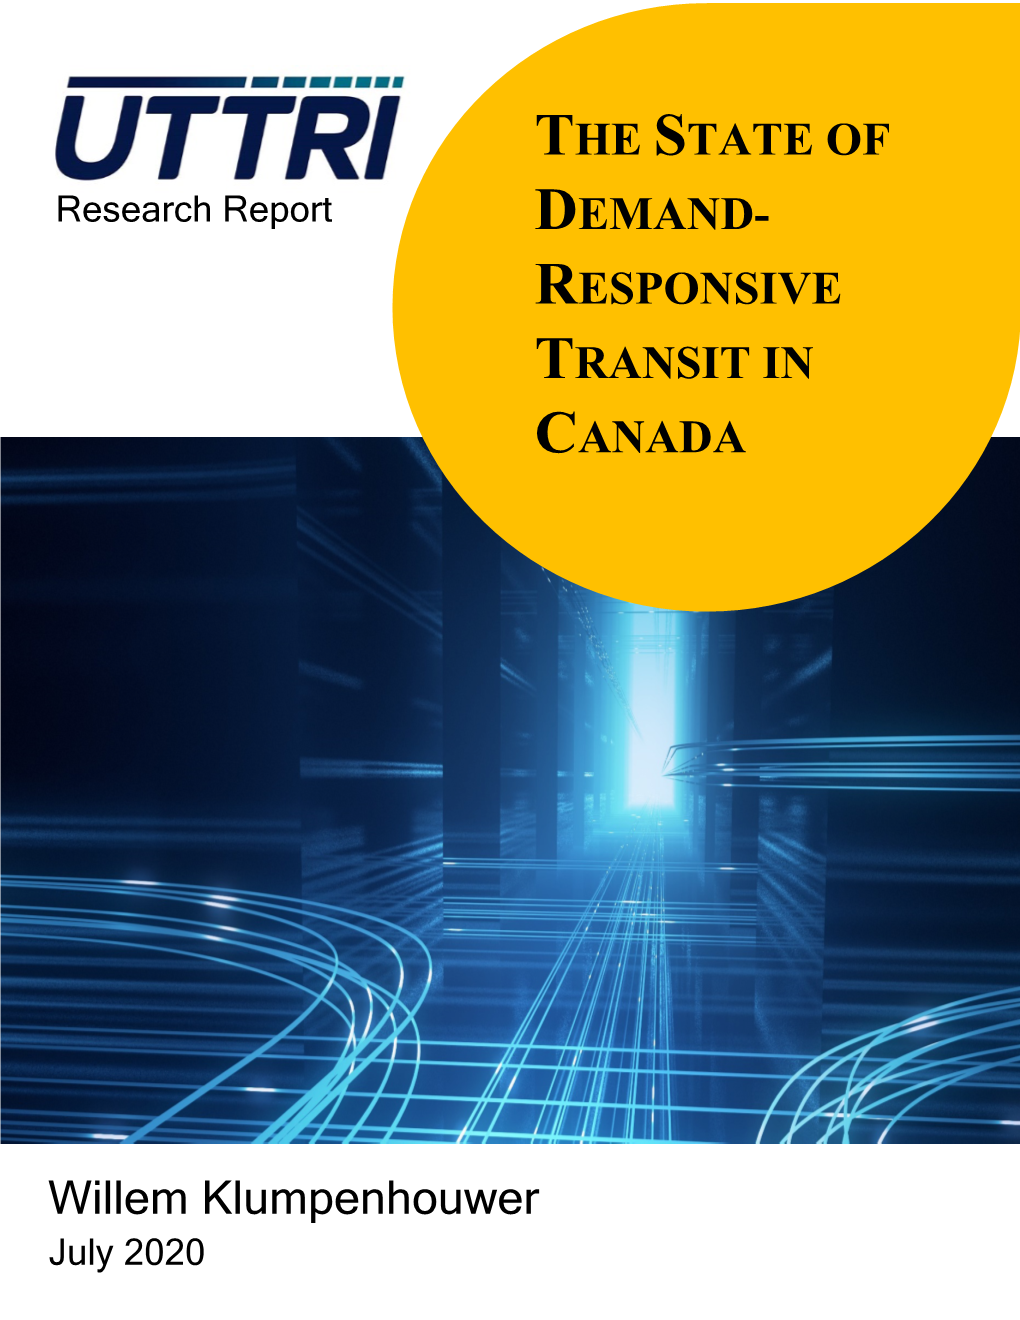 The State of Demand-Responsive Transit in Canada FINAL REPORT July, 2020